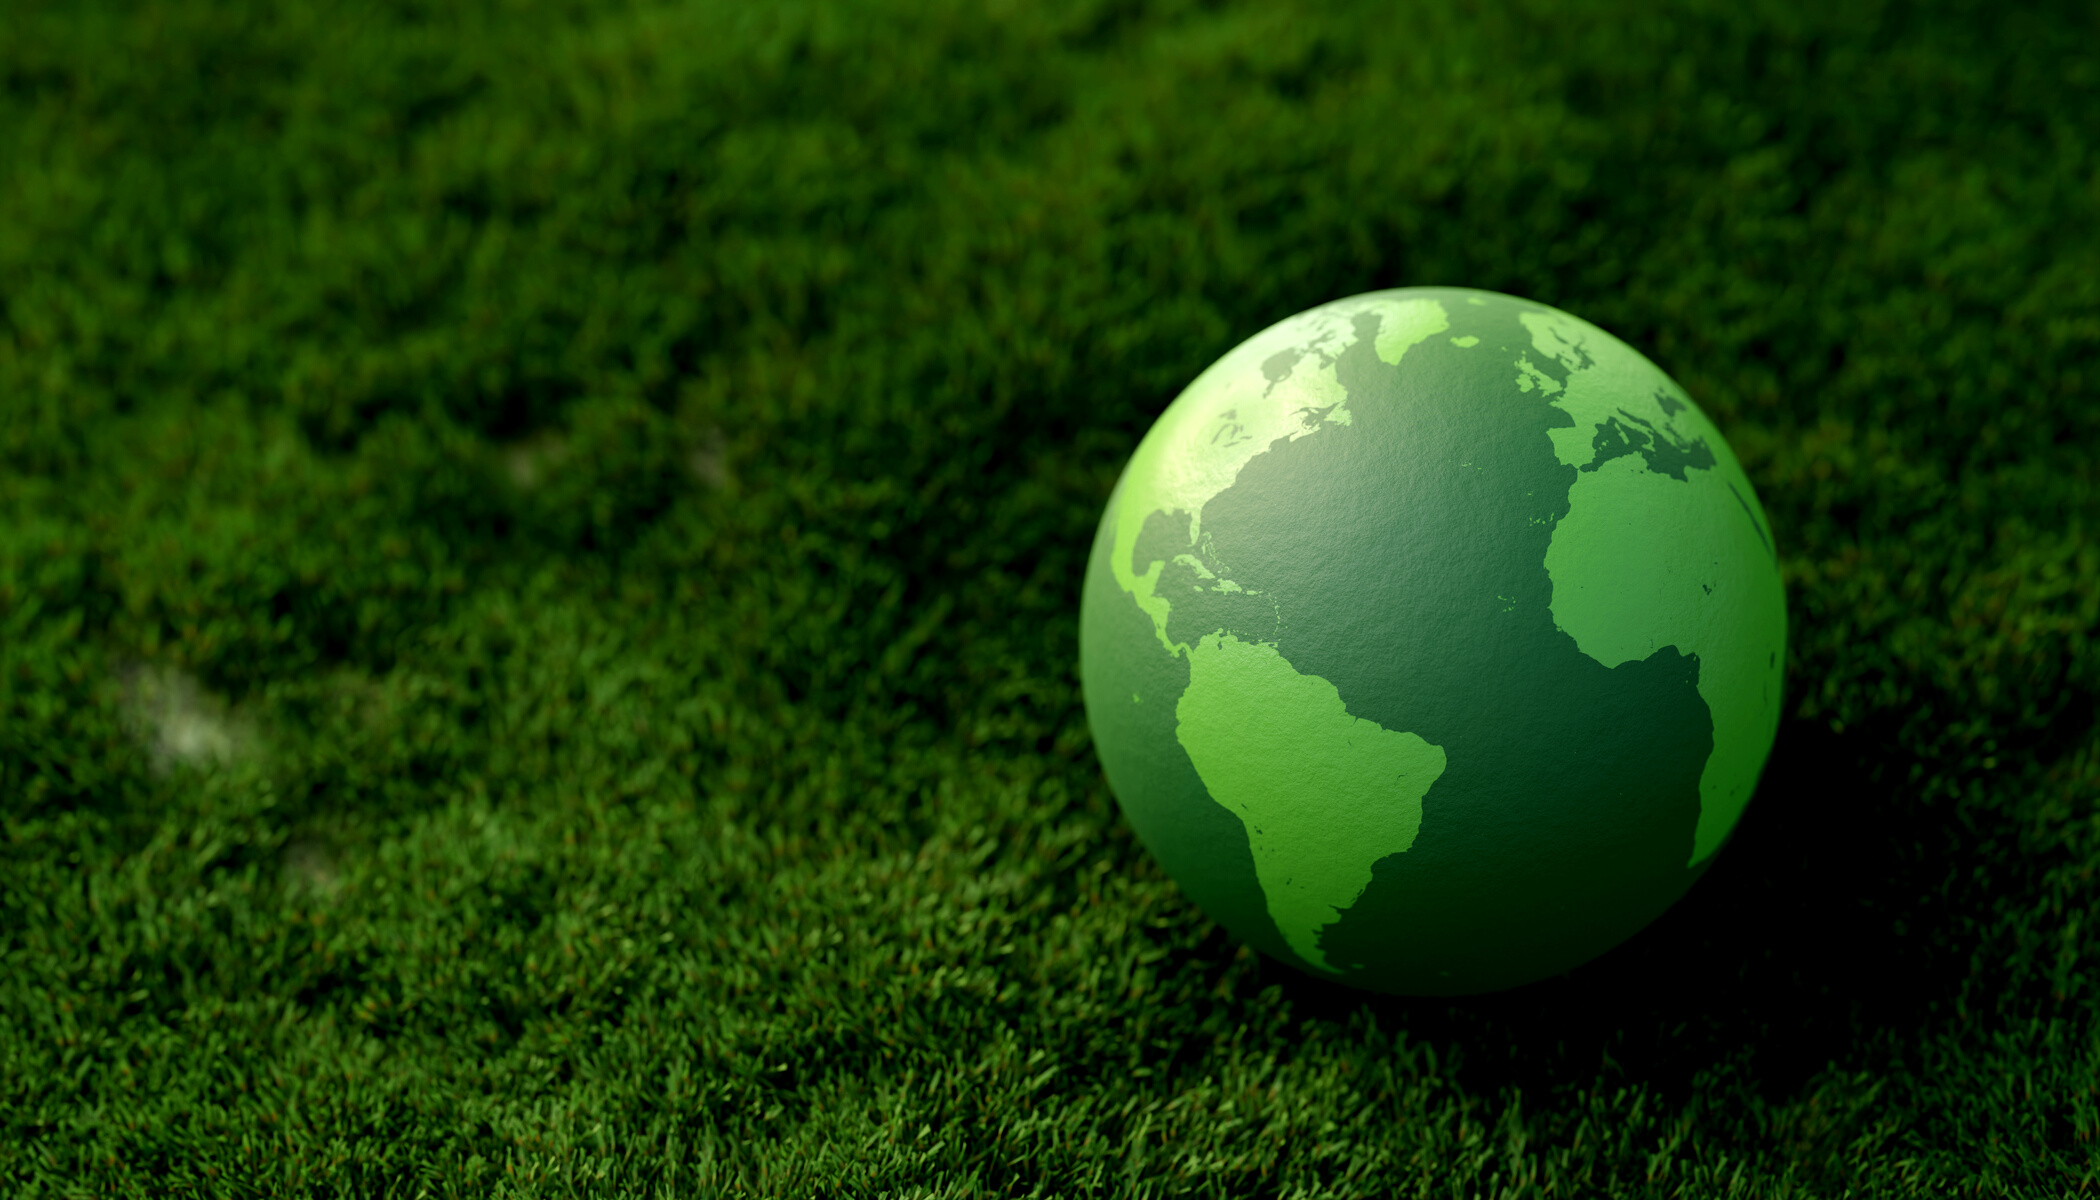 Green world ball concept for ESG environmental, social, and governance in sustainable and ethical business on green grass background. globe, earth, 3d render illustration